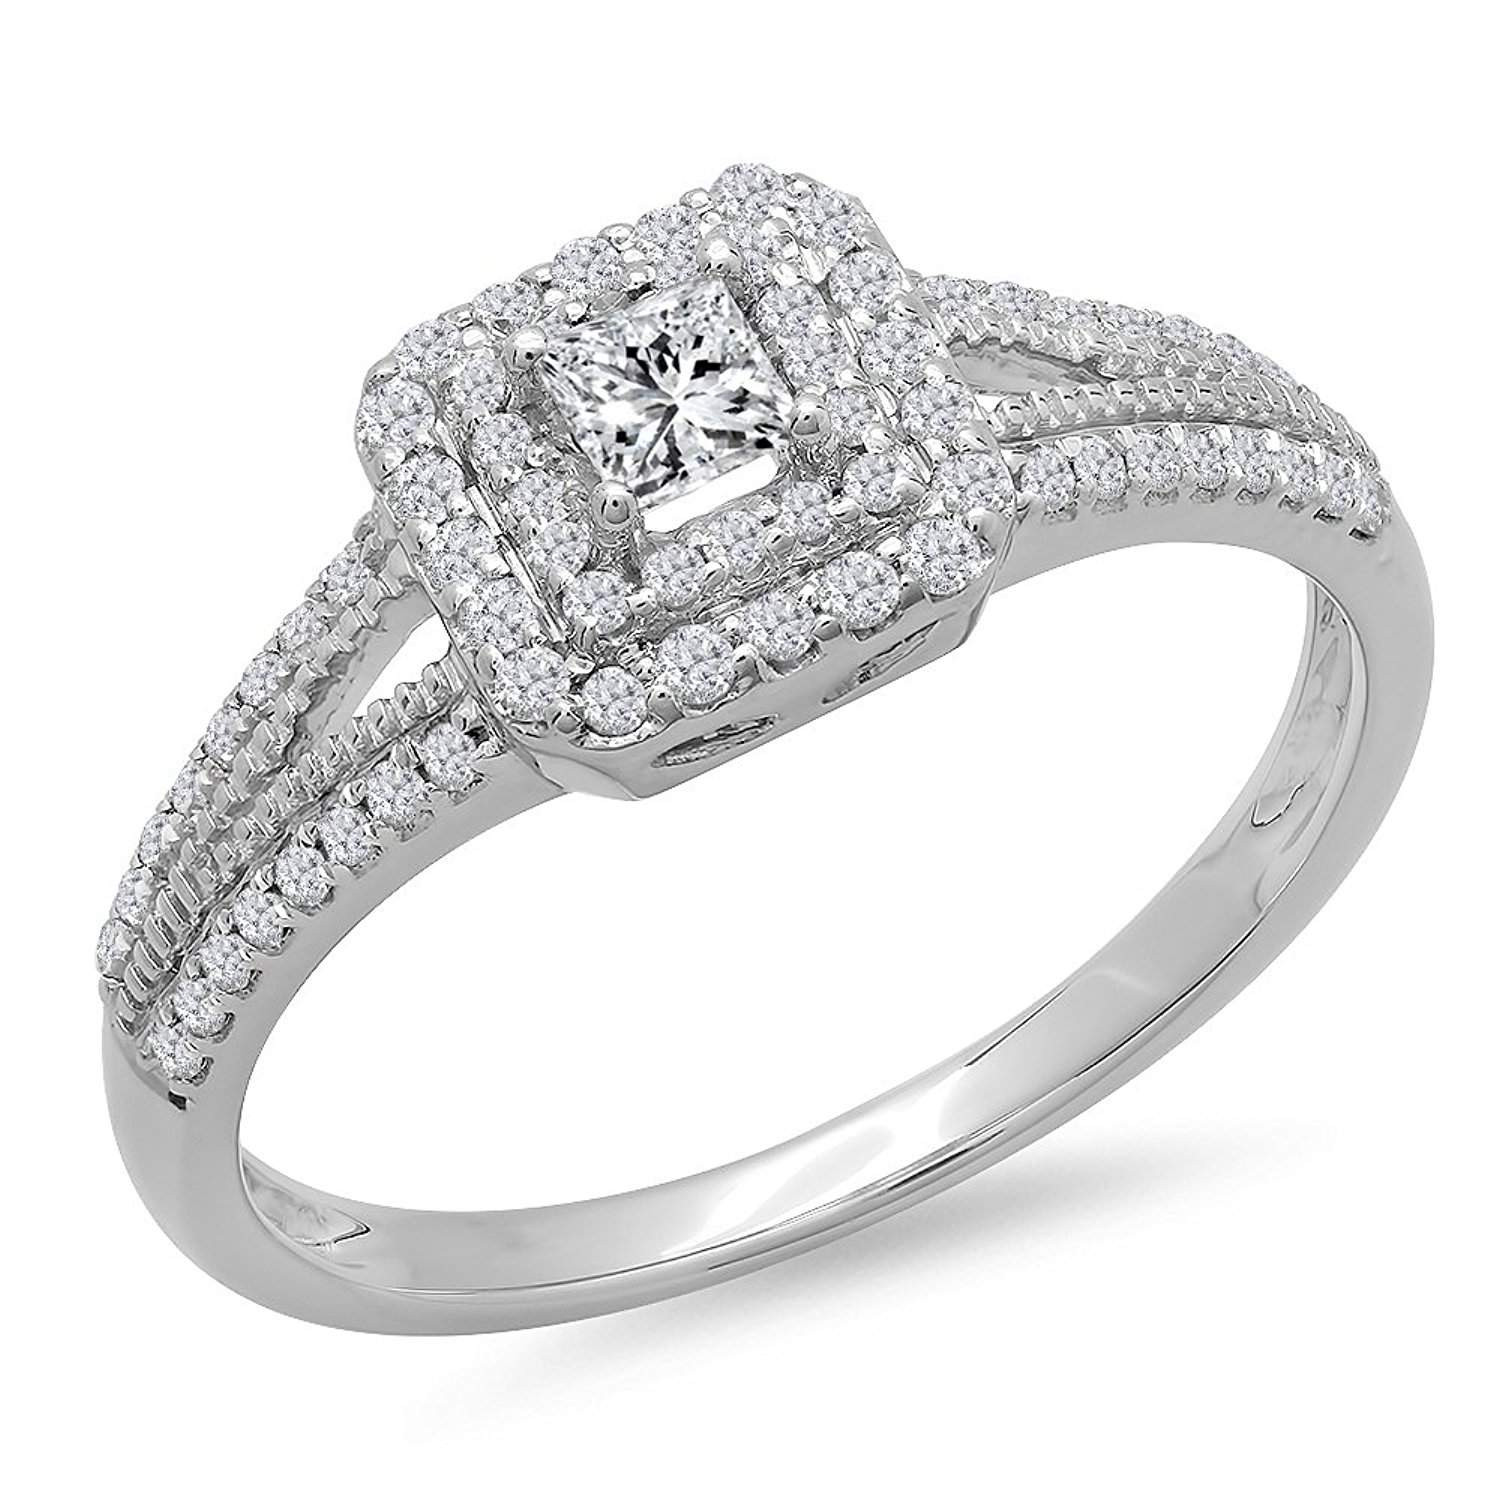 Discount Diamond Rings
 Top 10 Best Valentine’s Day Deals on Engagement Rings